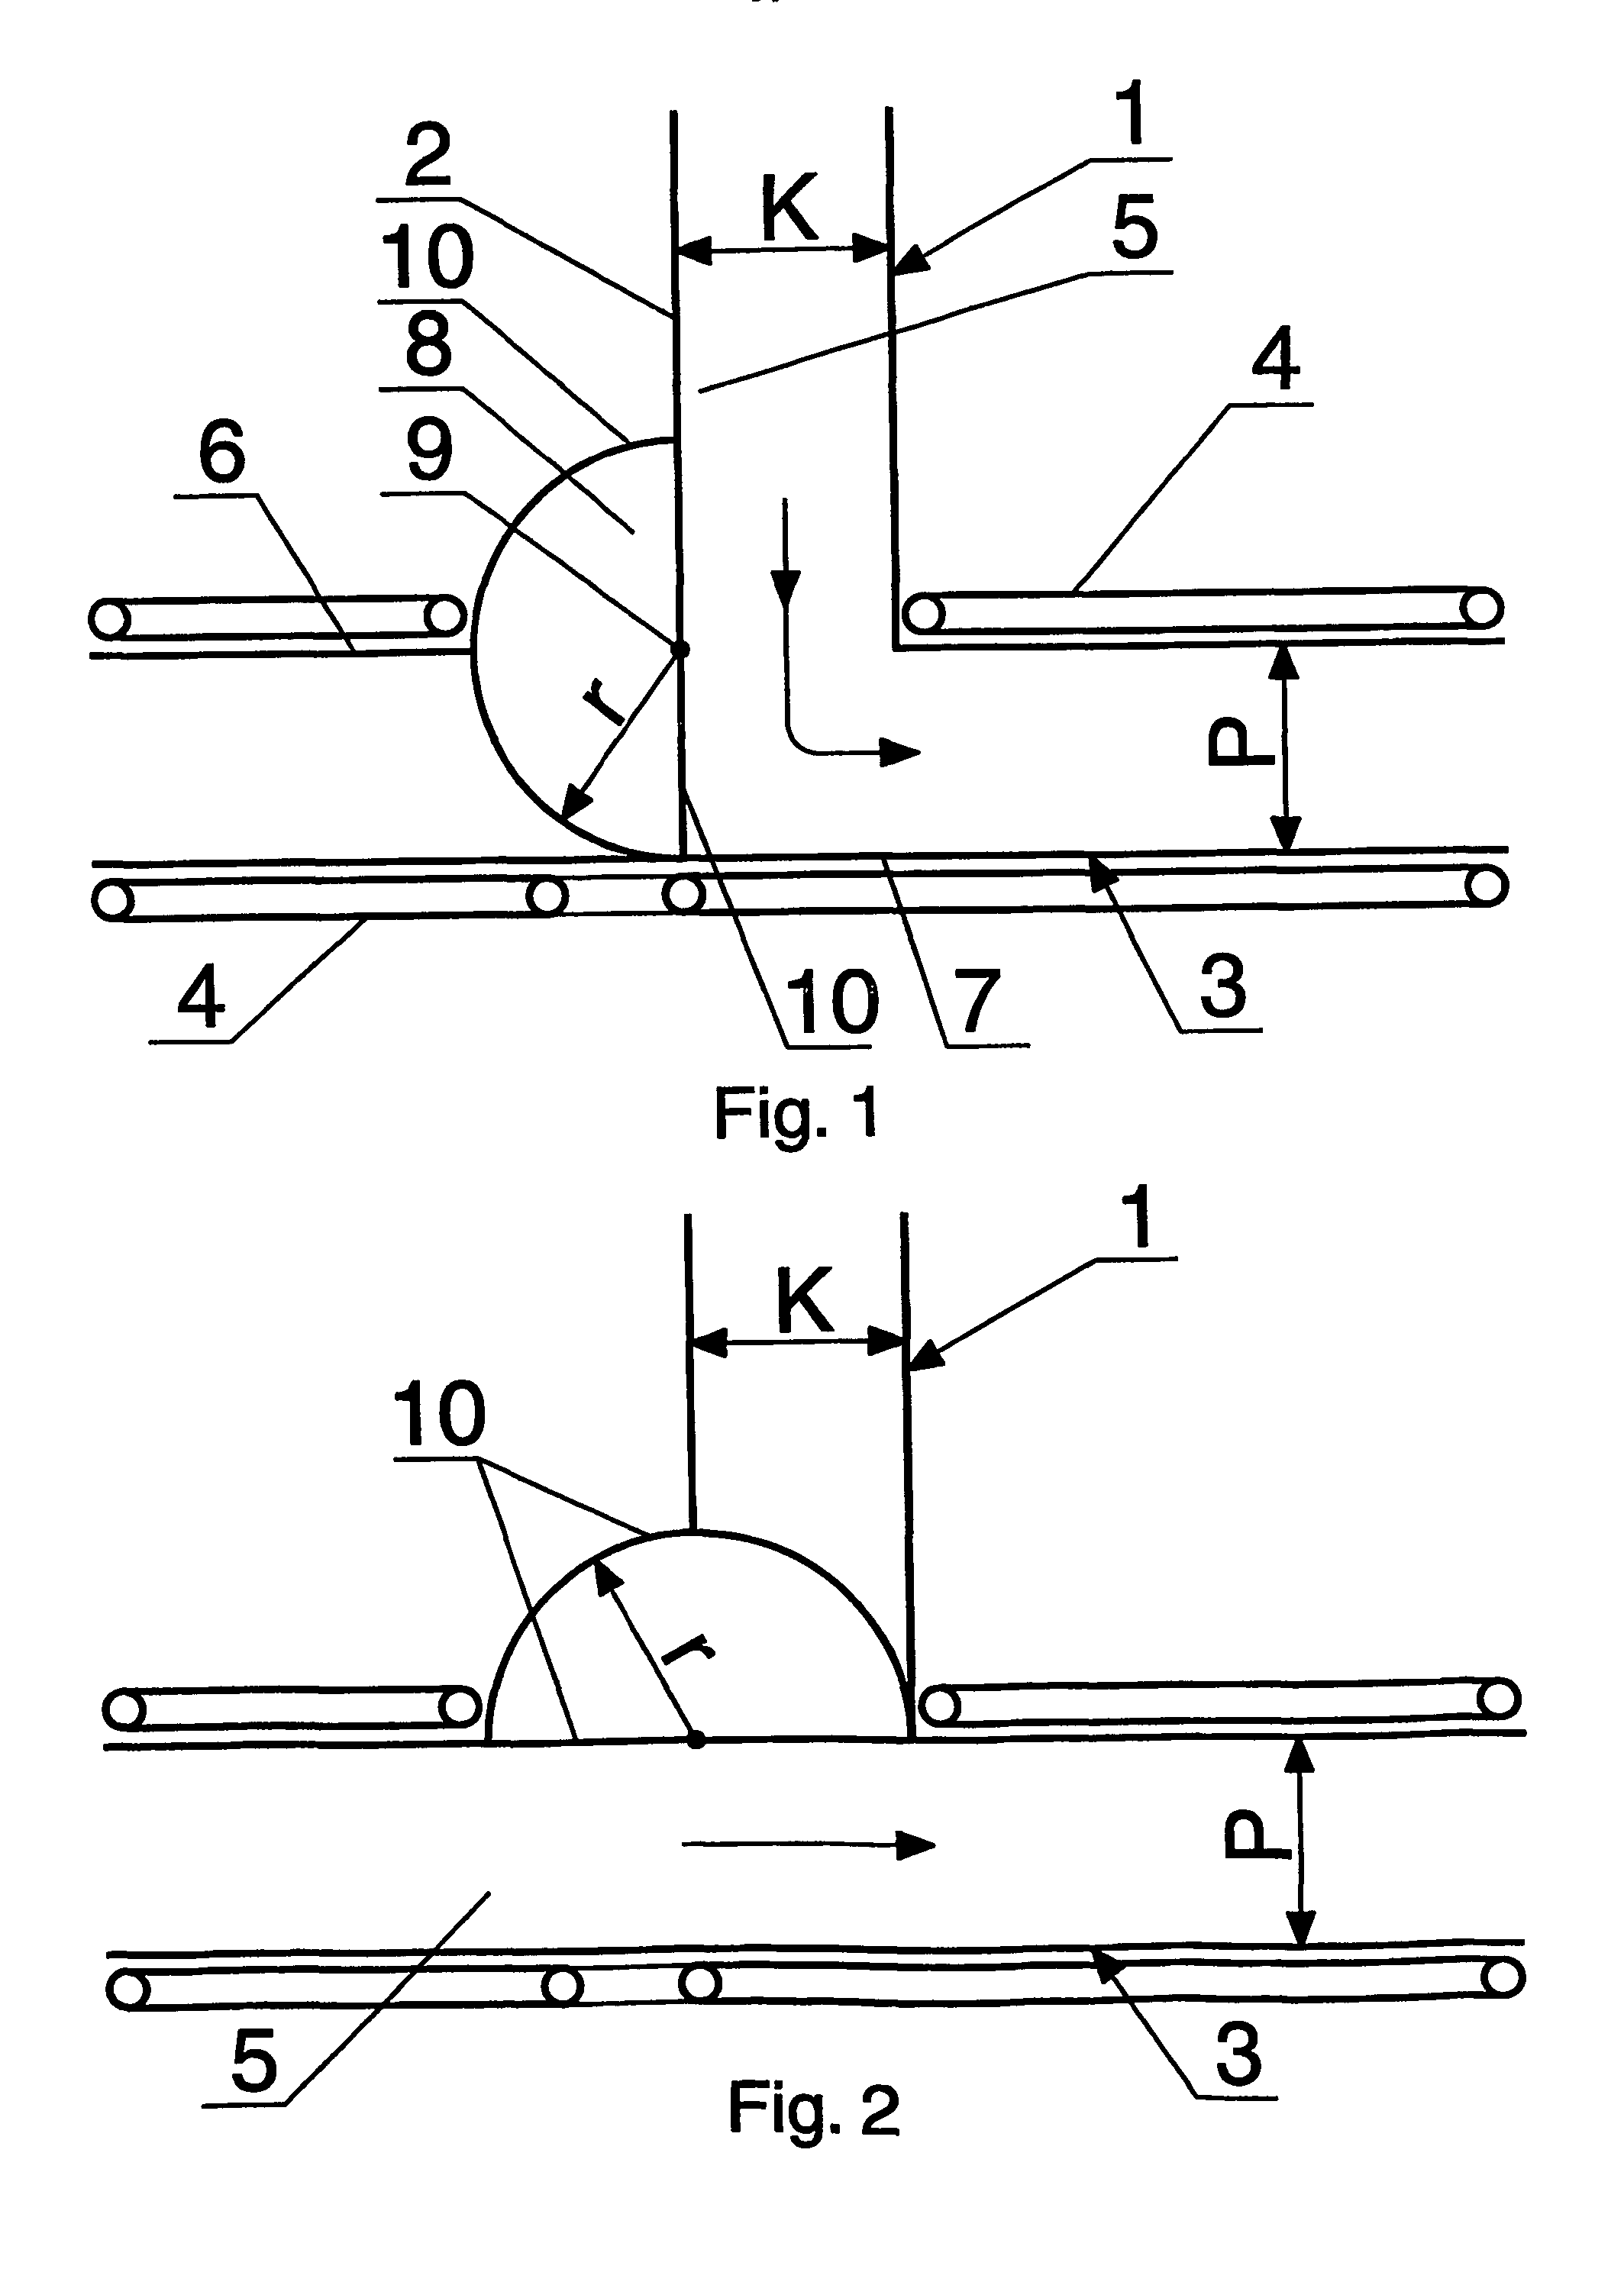 Method of separating streams of displacing multi-layered stacks of rodlike elements and valve device for separating streams of multi-layered stacks of rodlike elements